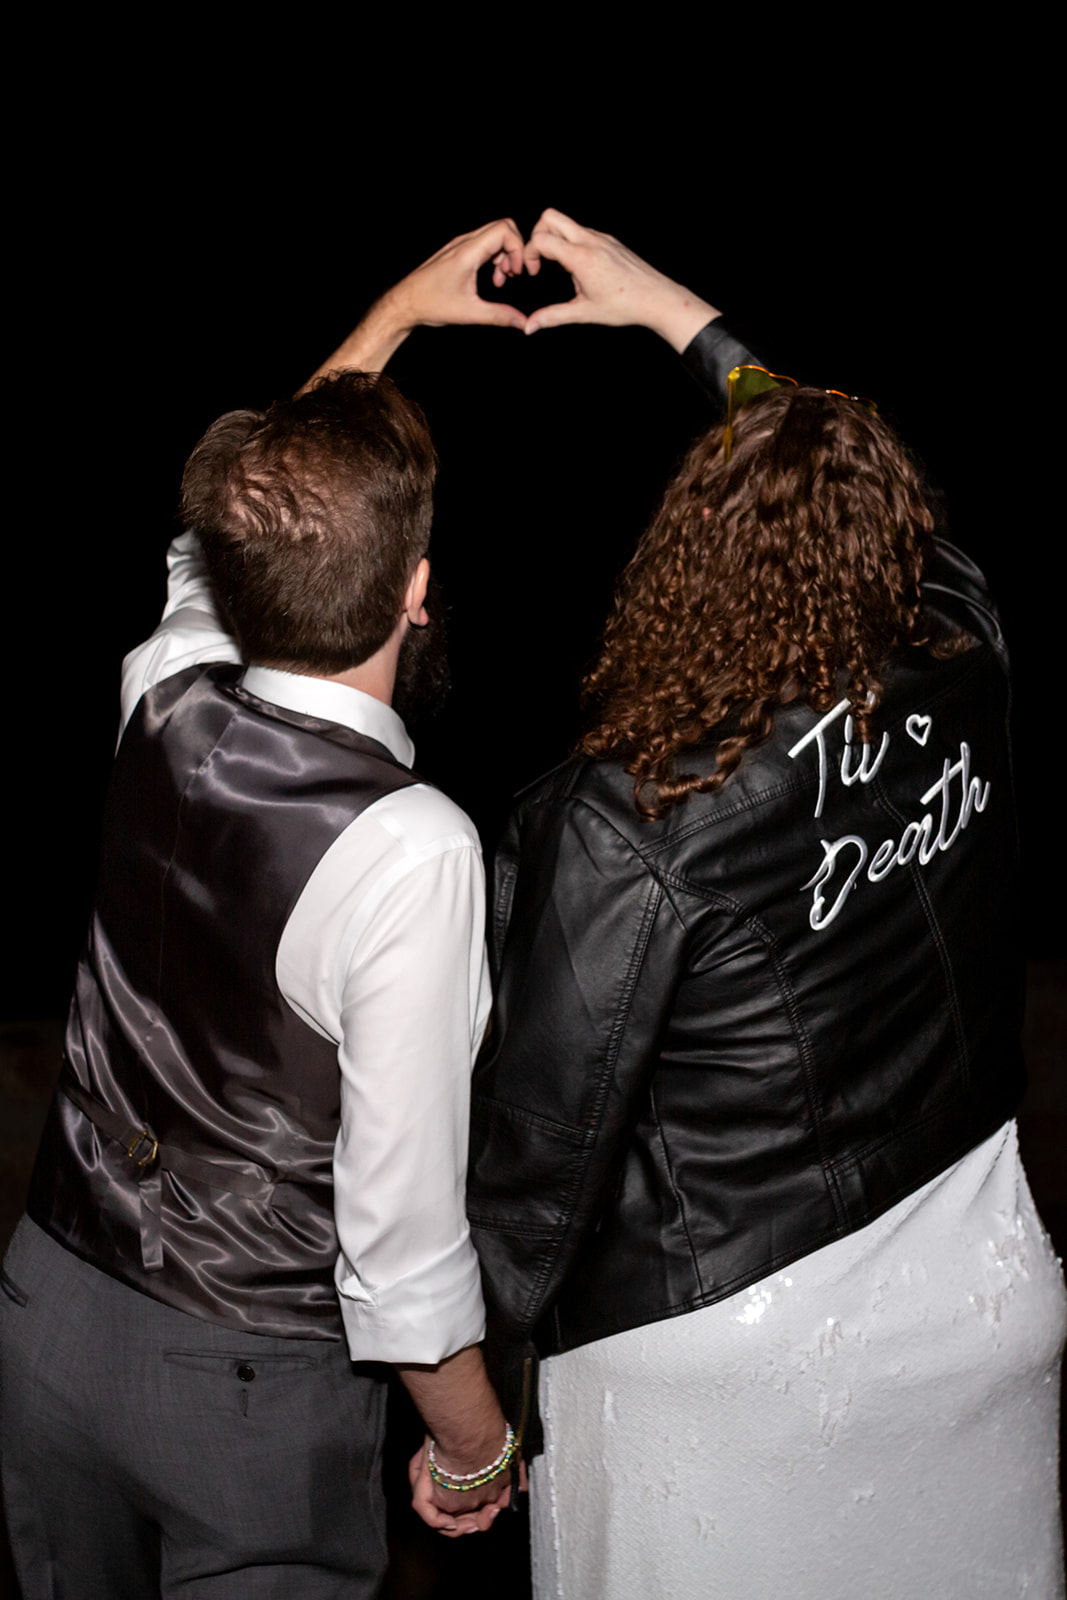 swiftie bride and groom heart hands reputation leather jacket